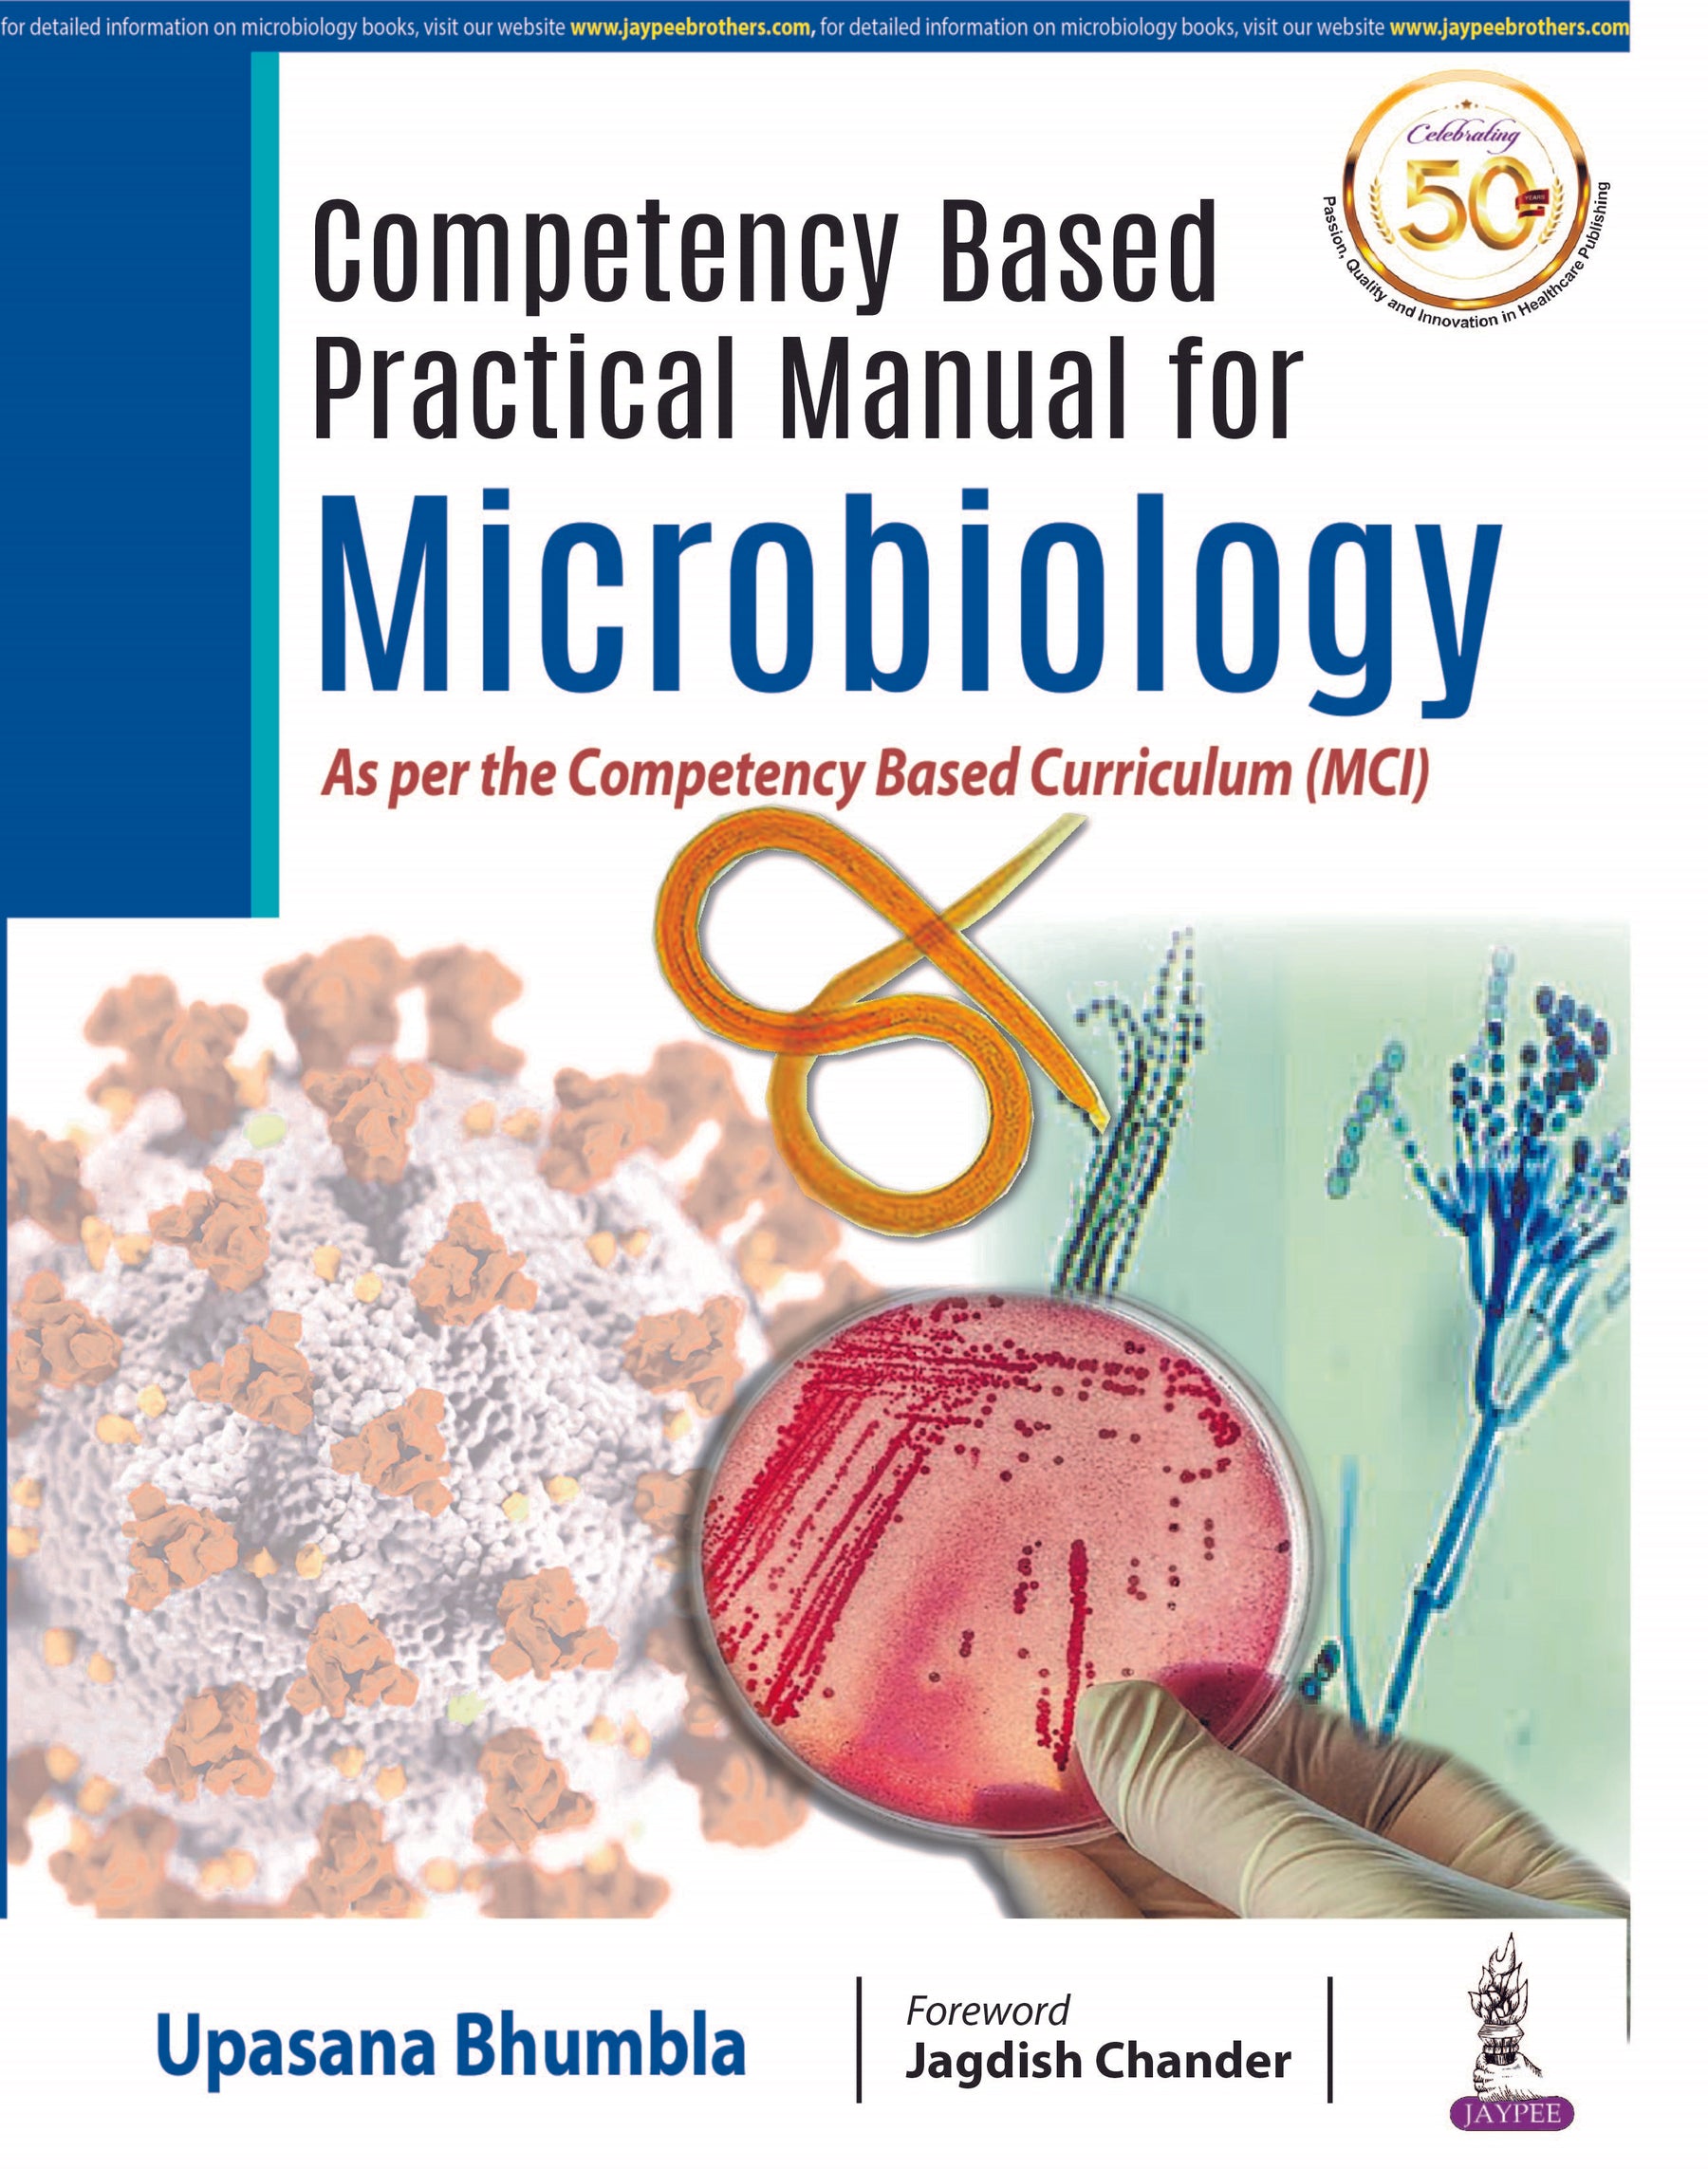 COMPETENCY BASED PRACTICAL MANUAL FOR MICROBIOLOGY AS PER THE COMPETENCEY BASED CURRICULUM (MCI),1/E,UPASANA BHUMBLA